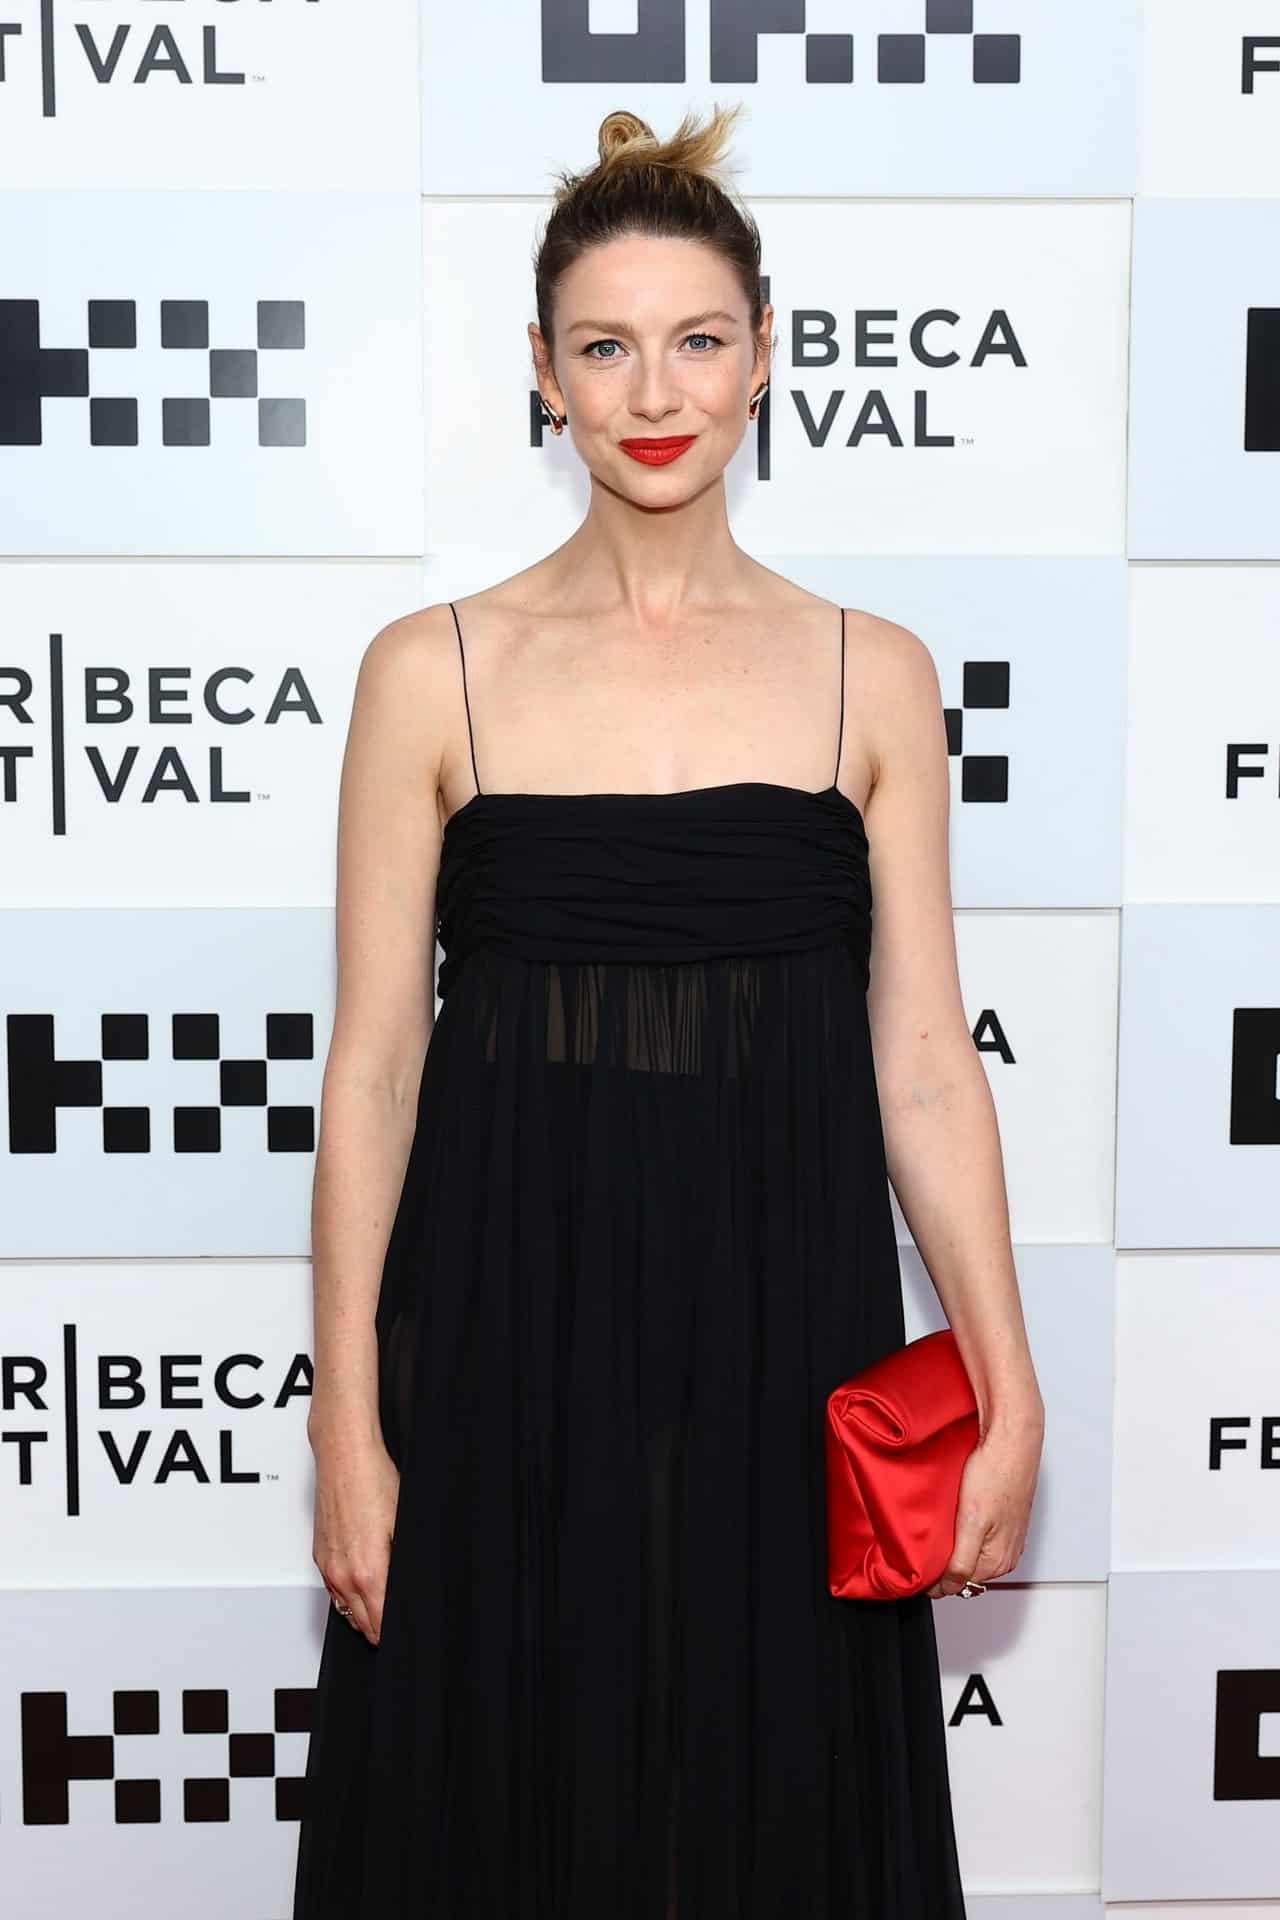 Caitriona Balfe Attends the 2023 Tribeca Film Festival in a Tulle Dress